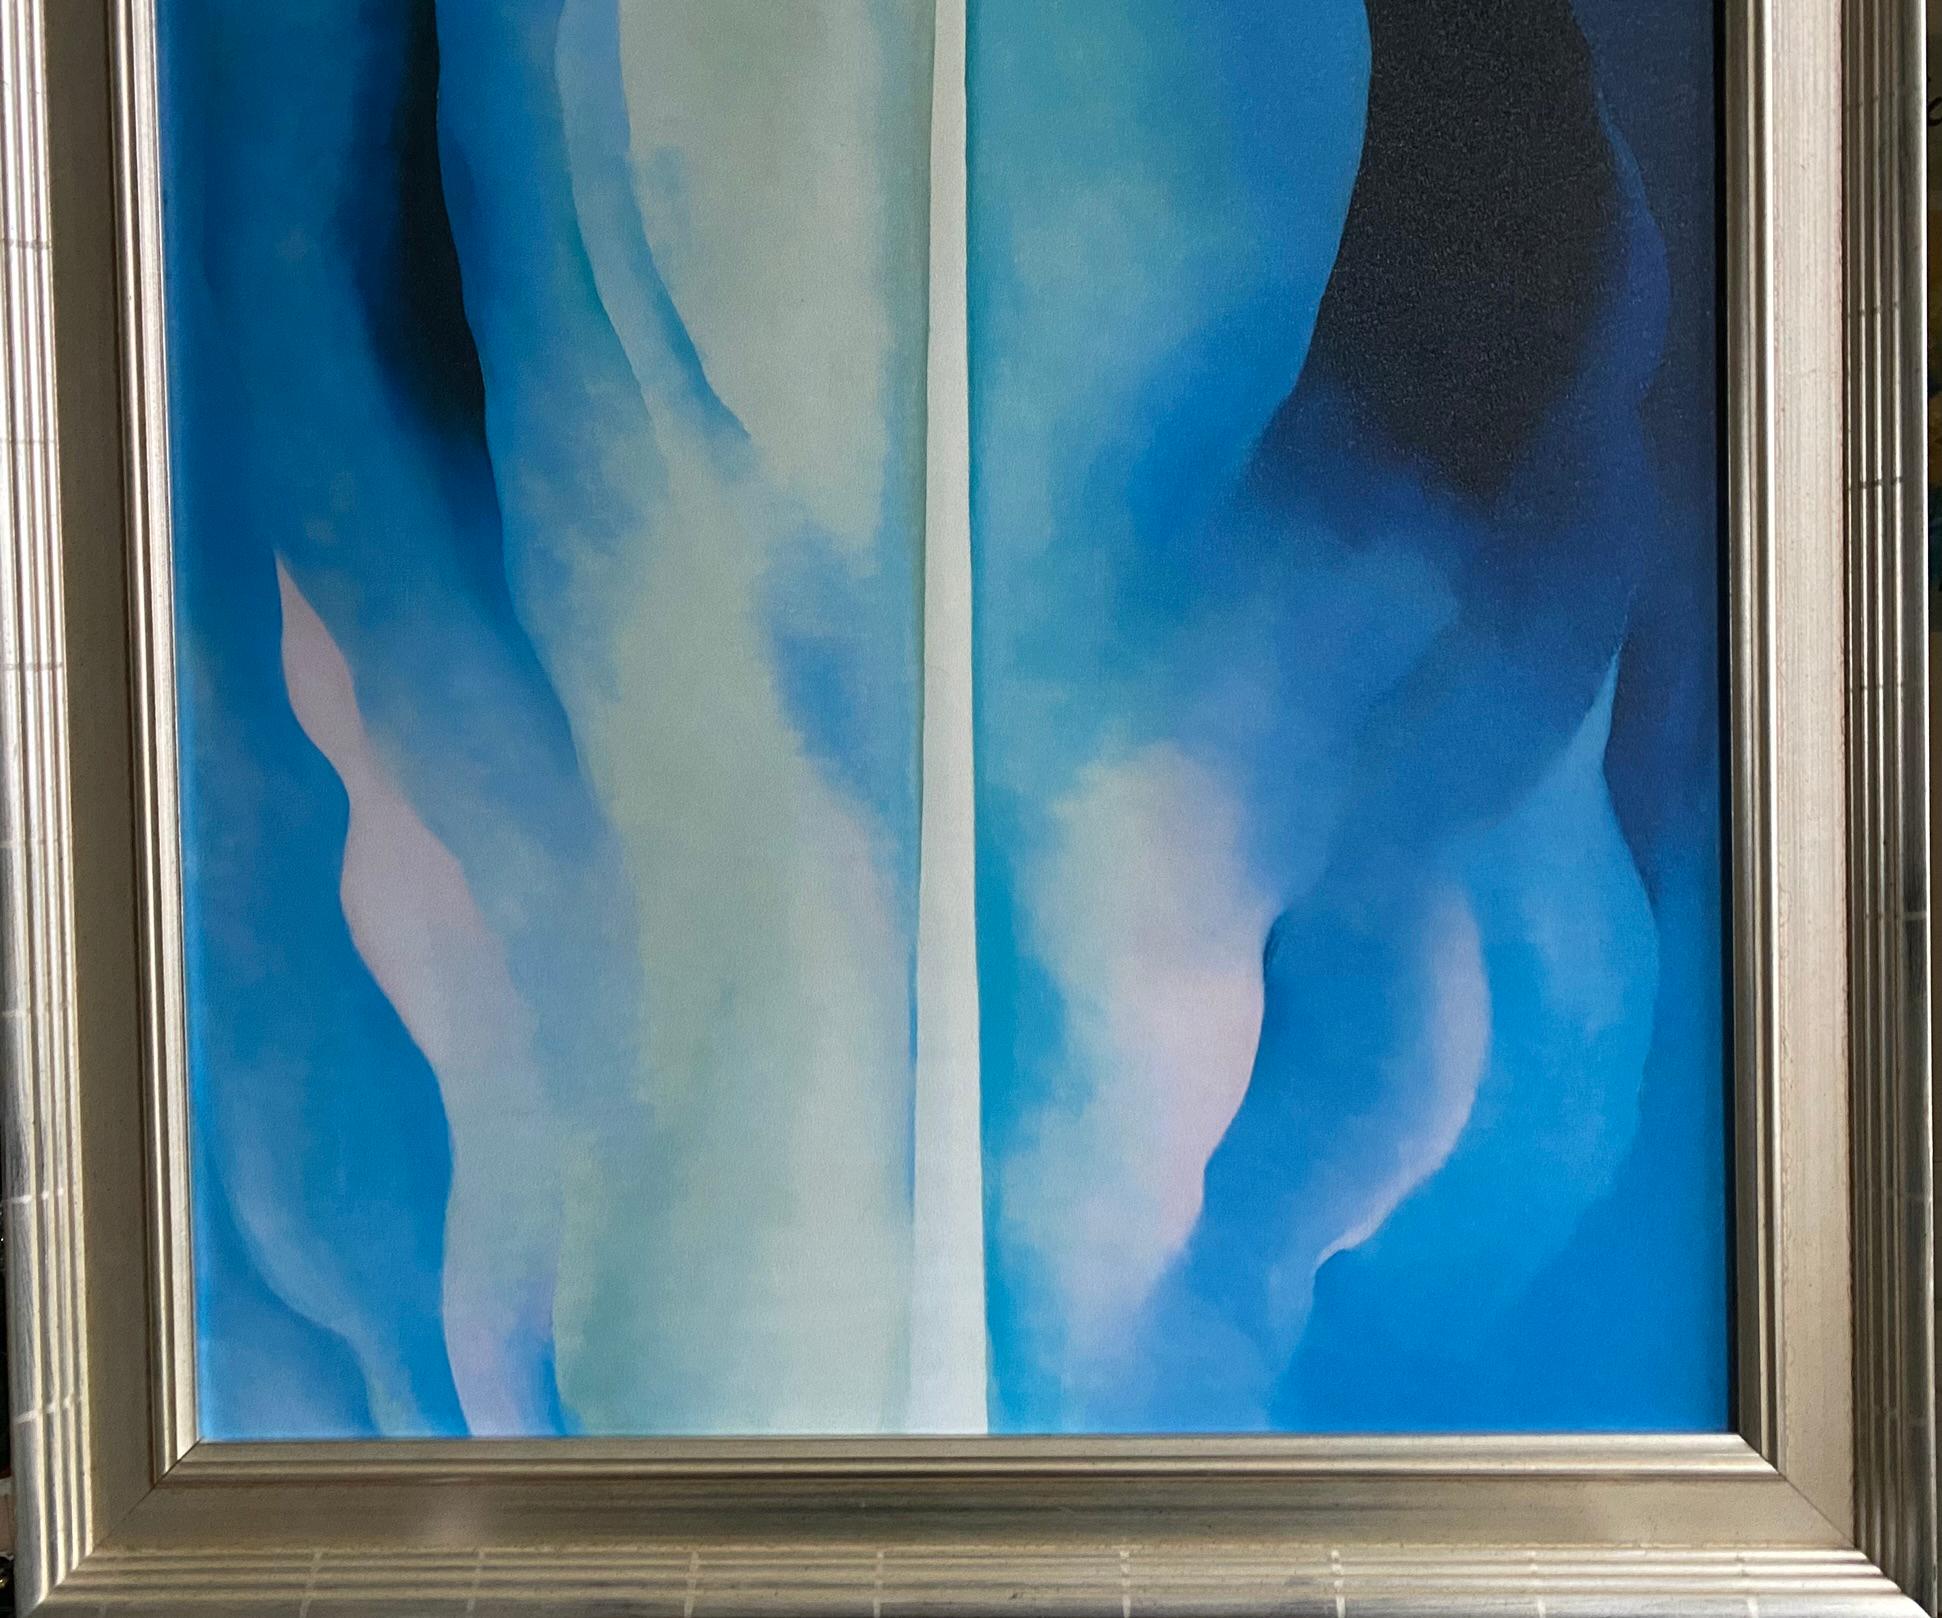 Georgia O'Keeffe-High Quality print by MoMA circa1997-Abstraction Blue-GSYStudio For Sale 11